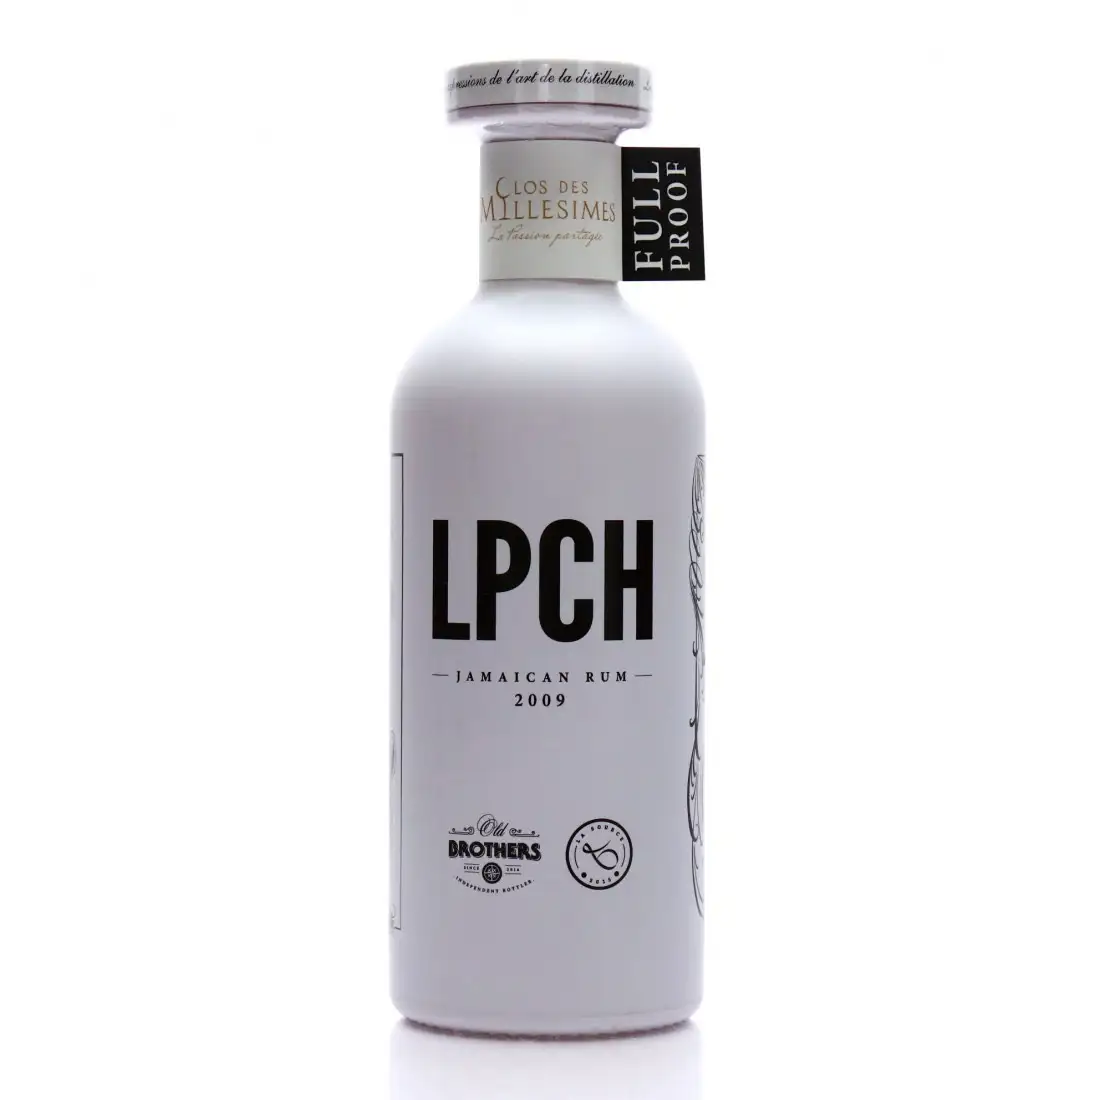 Image of the front of the bottle of the rum LPCH